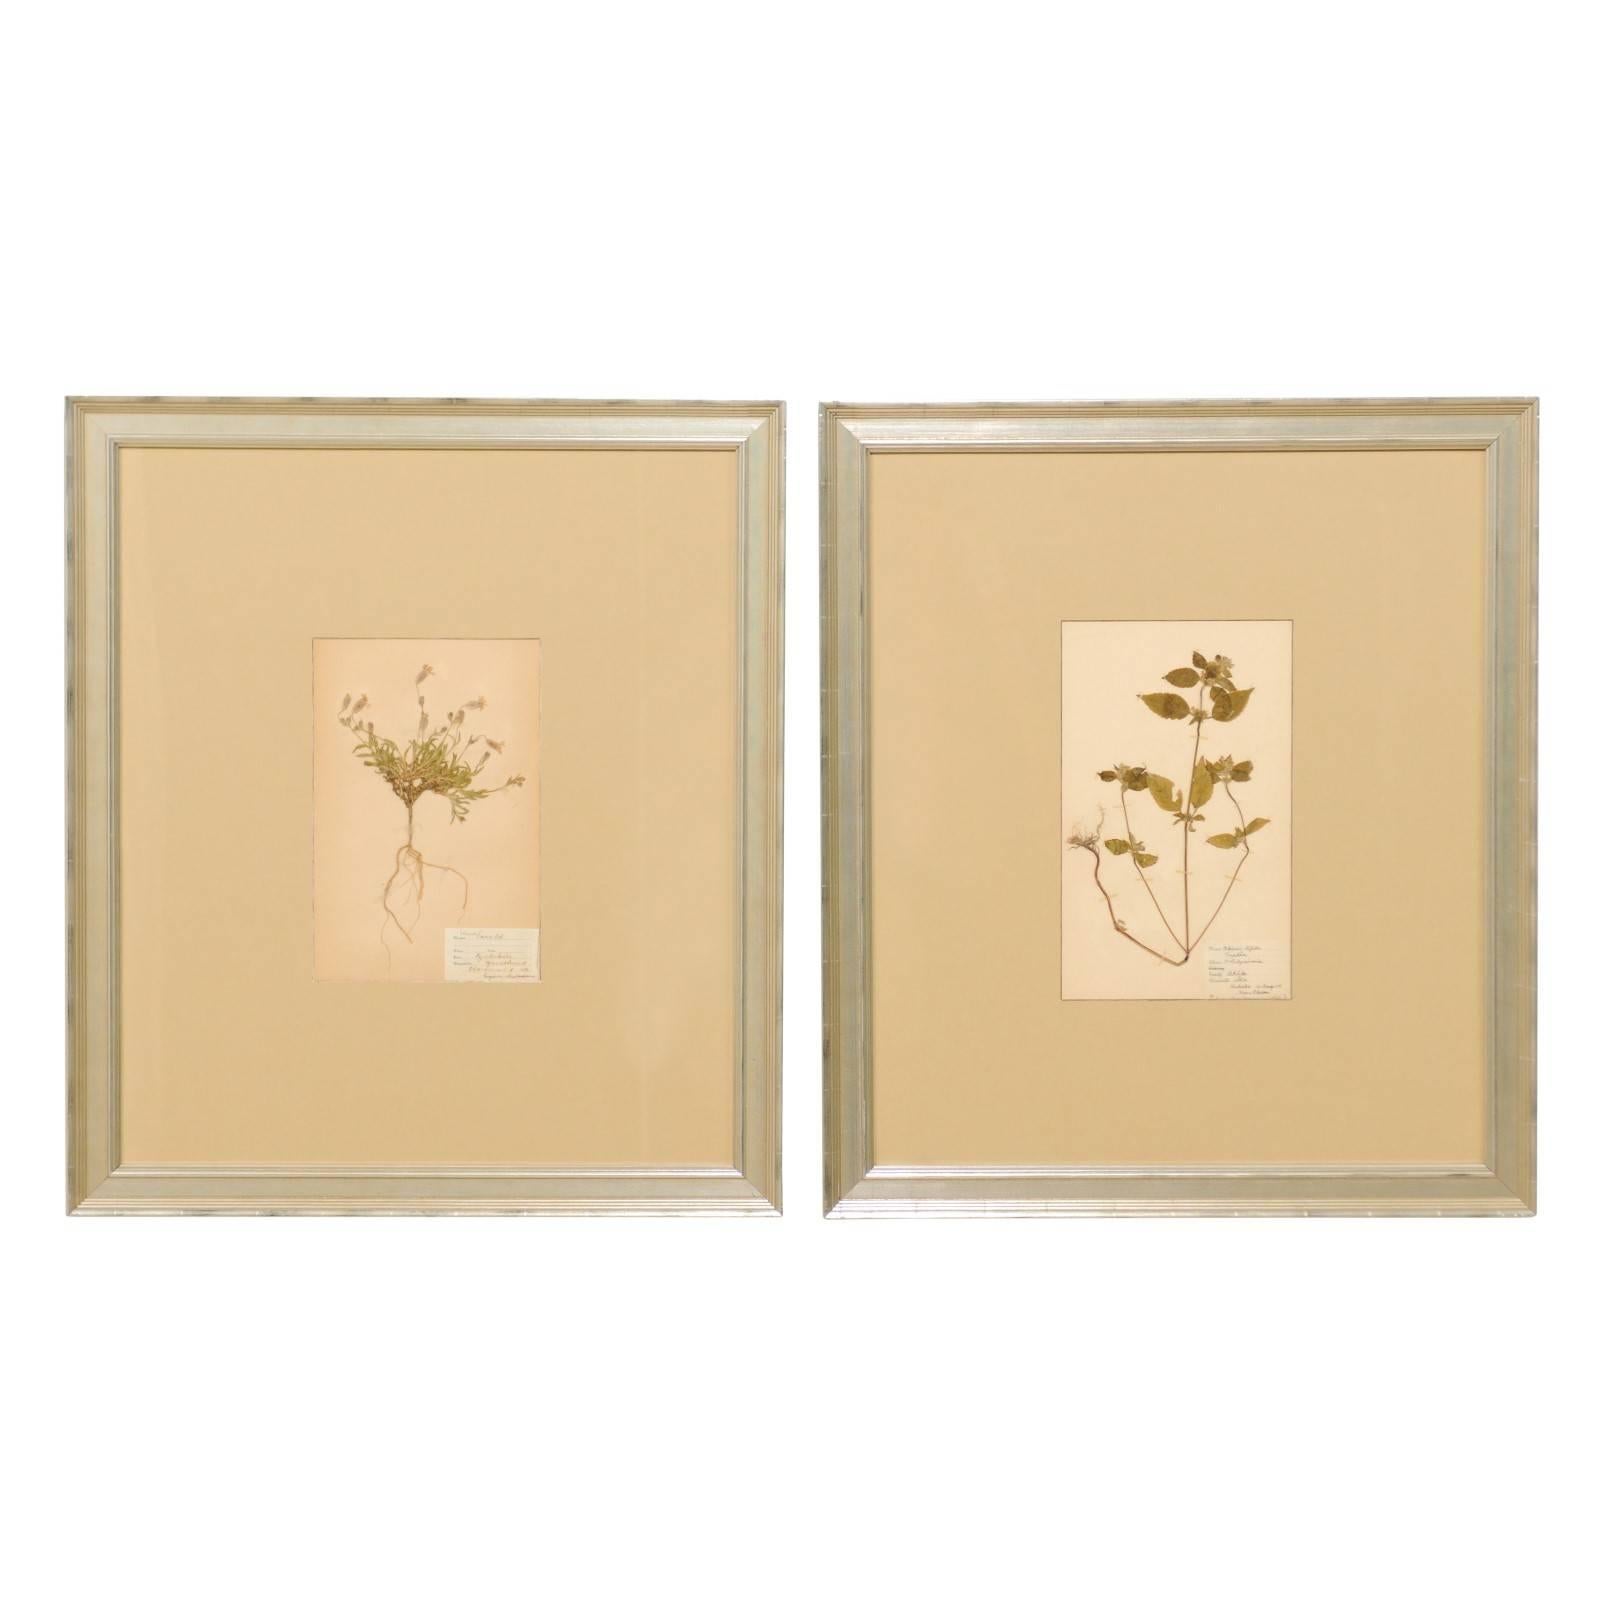 Pair of Swedish Framed Herbariums and Botanicals from the Early 20th Century